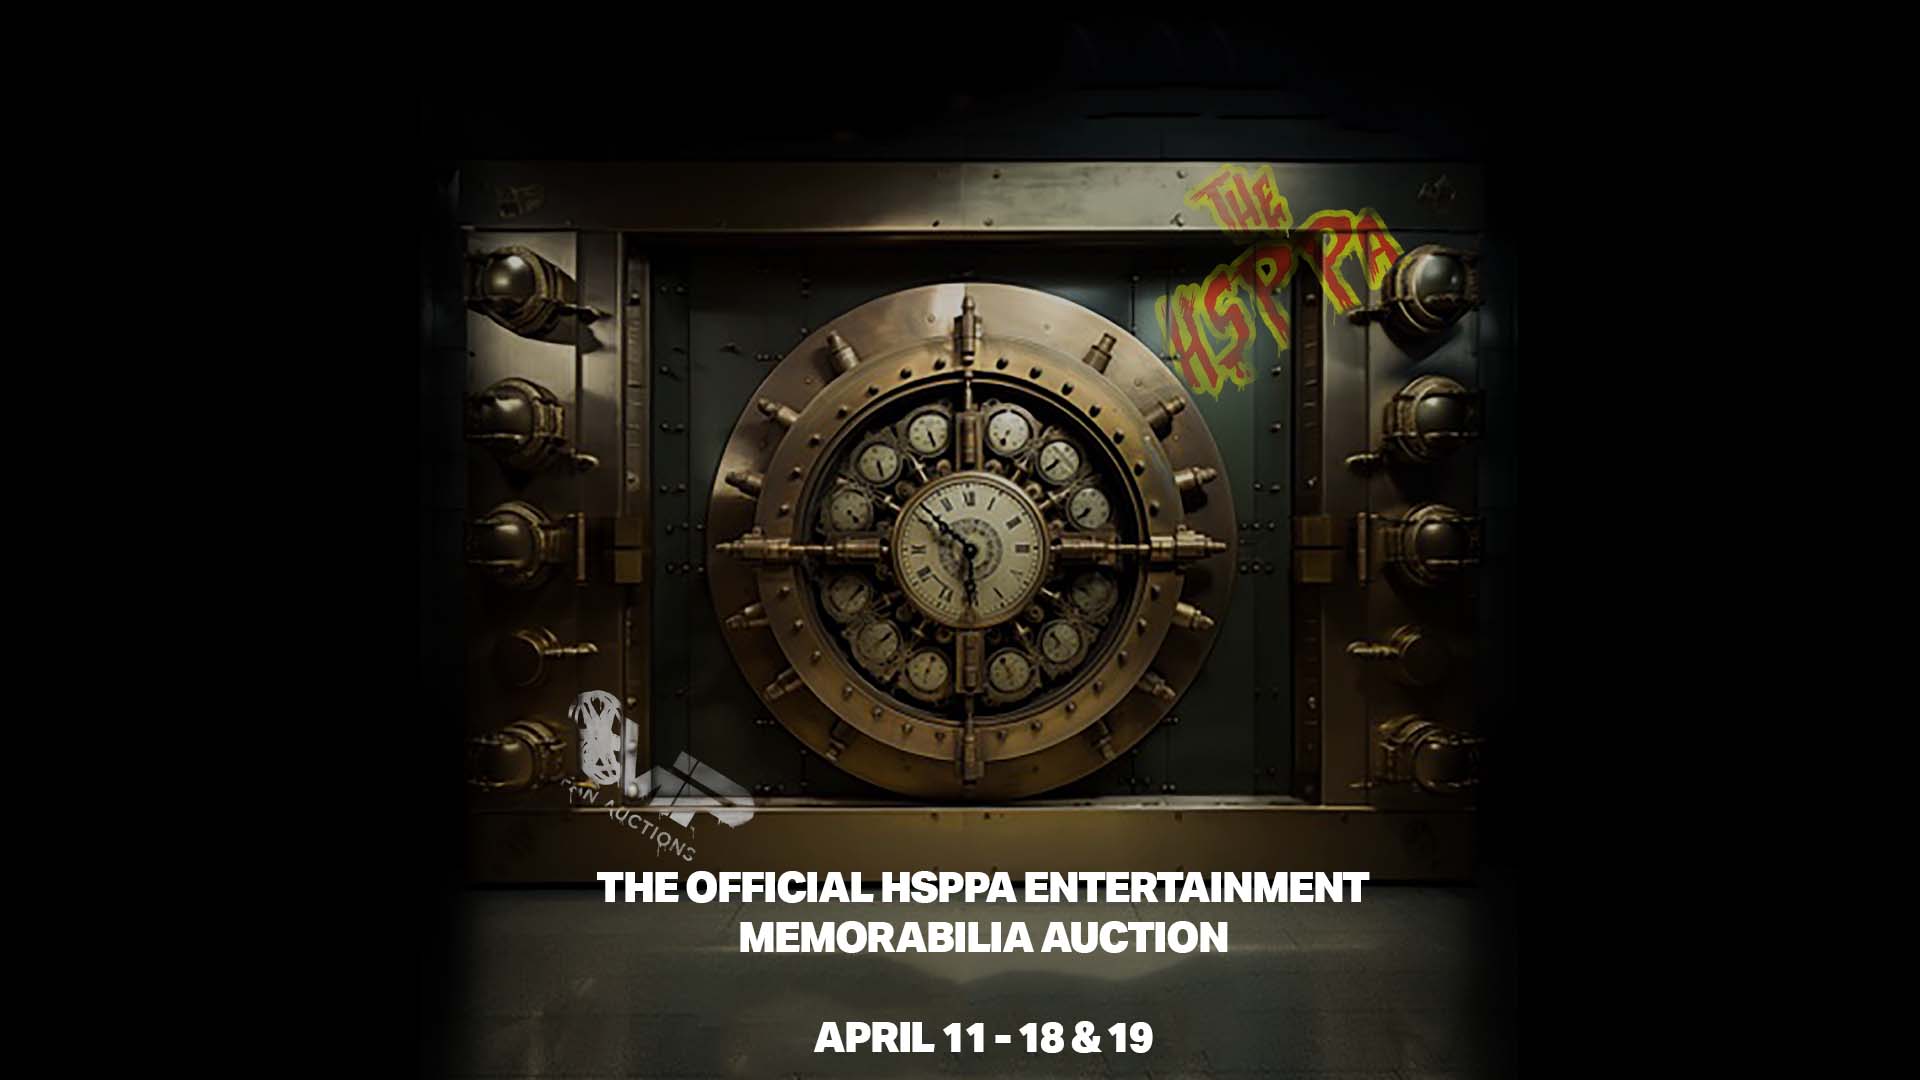 Official 'The HSPPA' prop and costume auction key art featuring props and costumes from titles like "The Terminator", "Interstellar", and more.